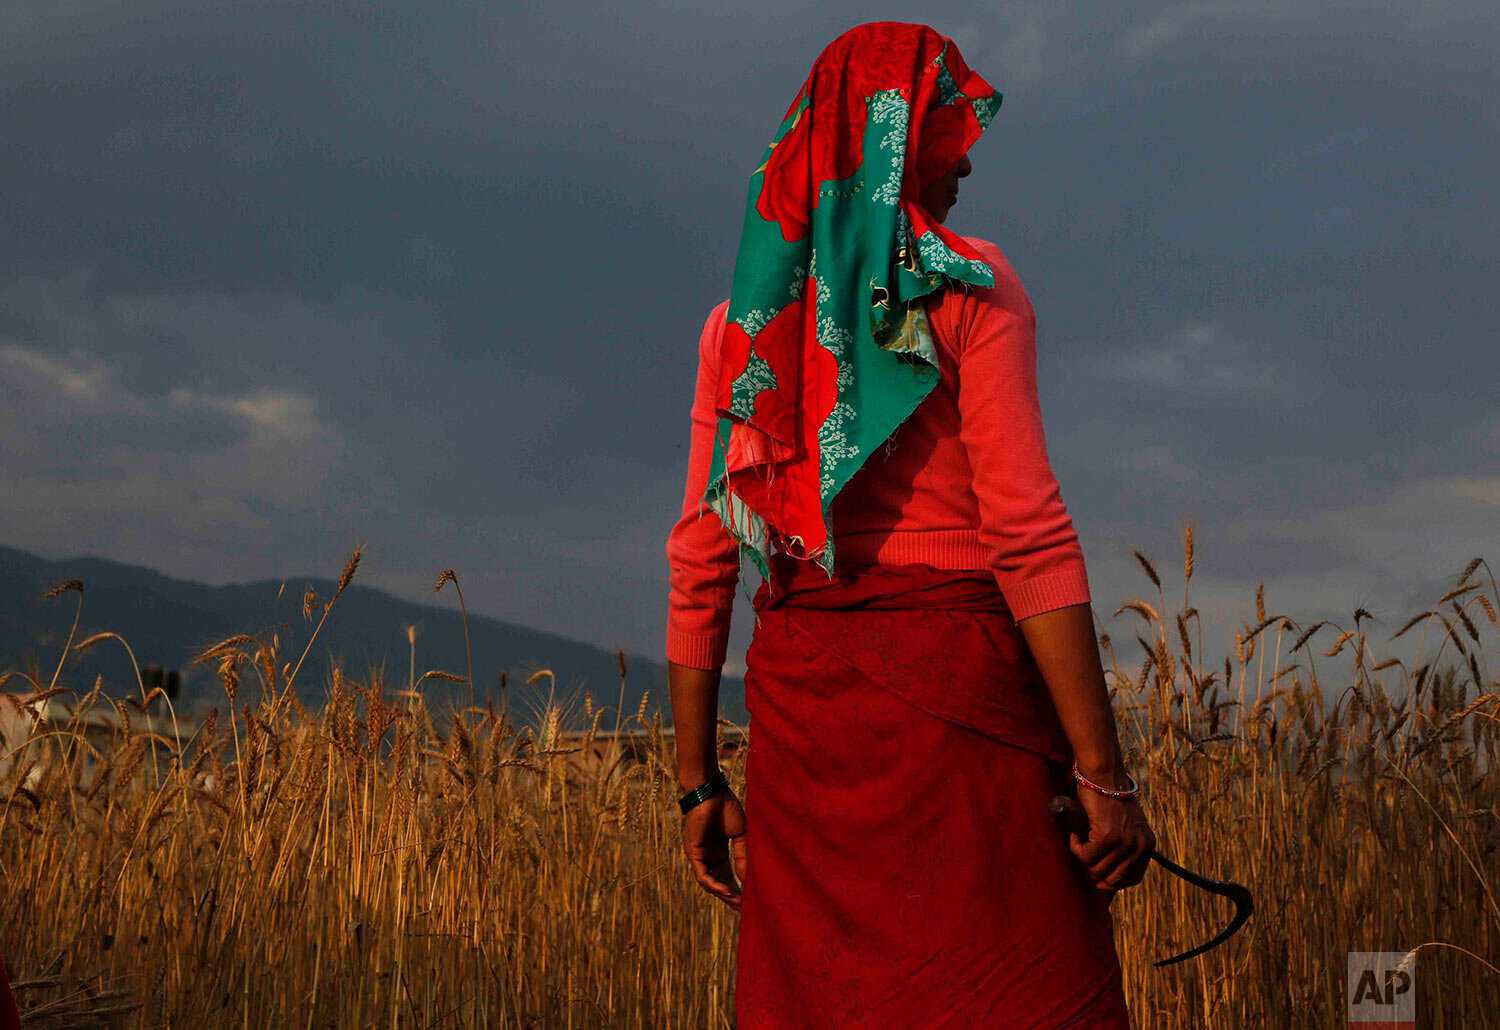  A Nepalese farmer stands holding a sickle by a wheat field during lockdown on the outskirts of Kathmandu, Nepal, Wednesday, May 13, 2020.. (AP Photo/Niranjan Shrestha) 